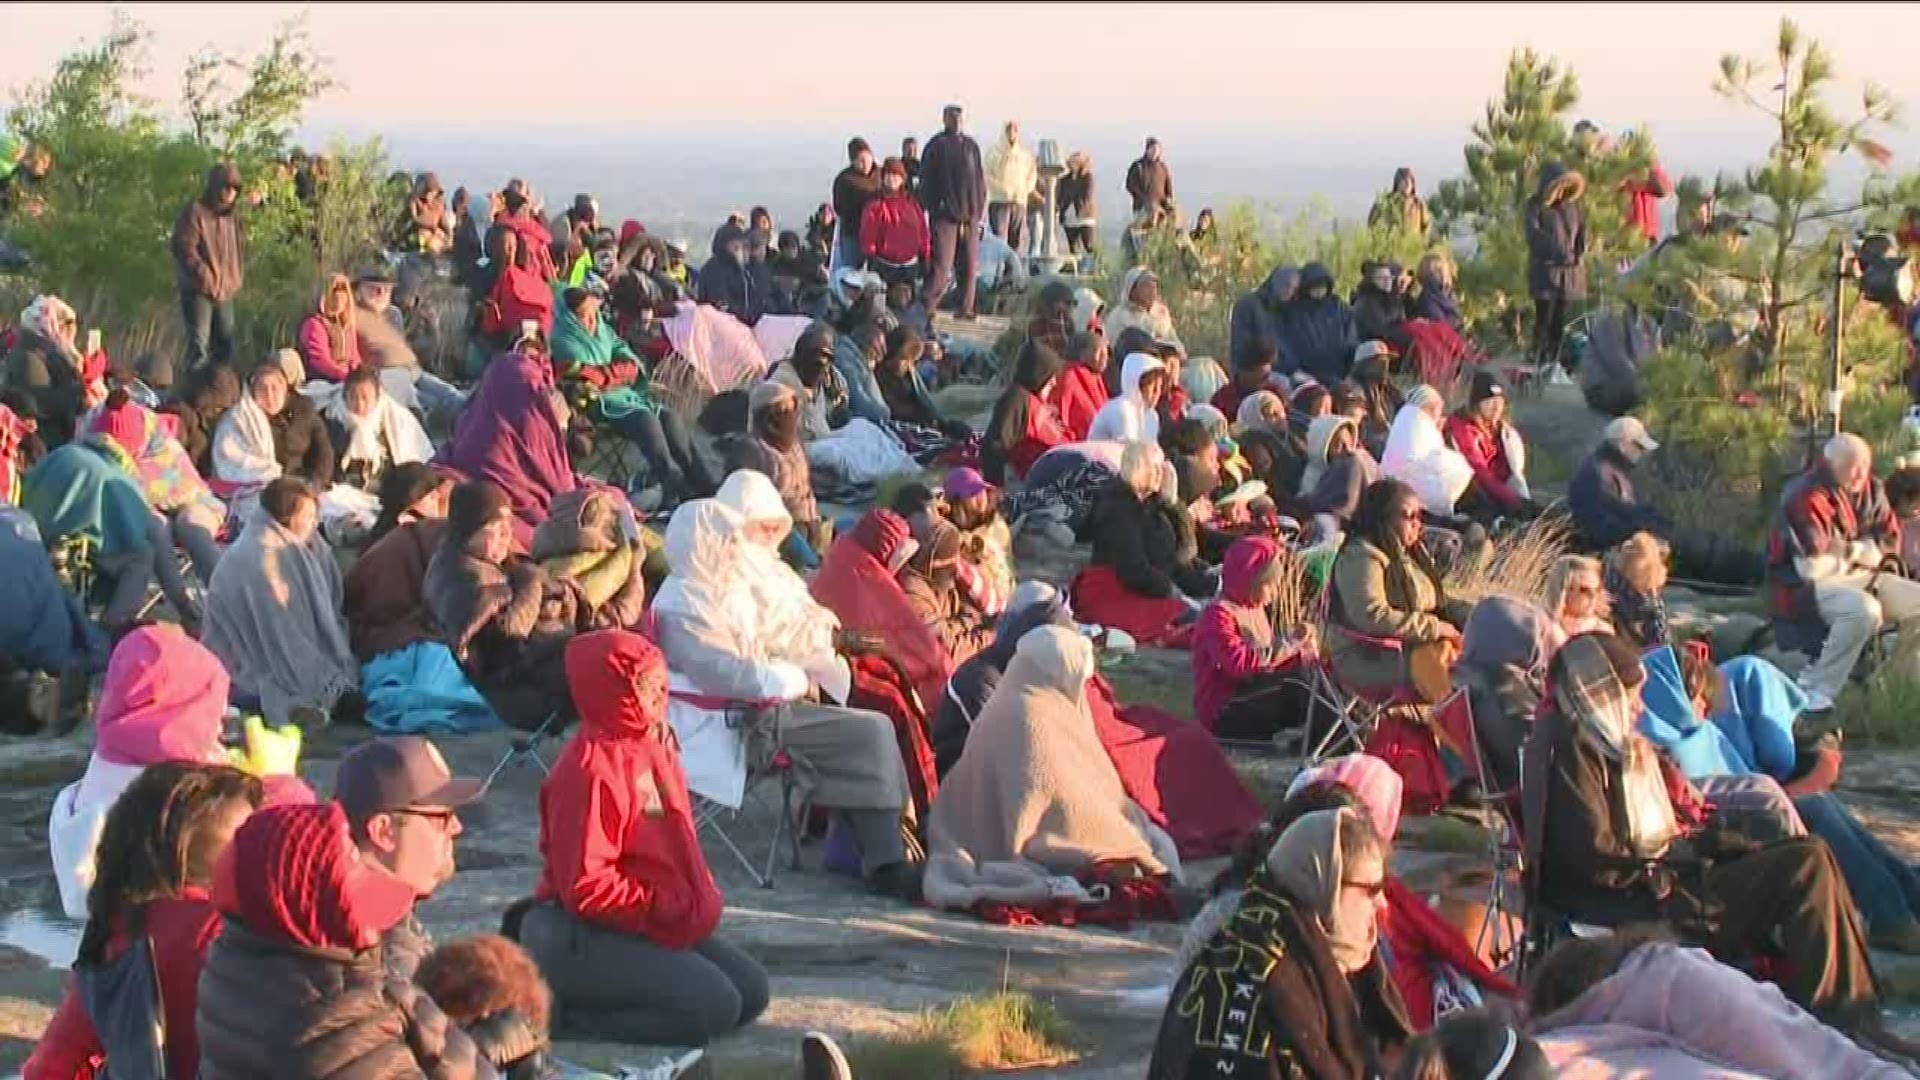 Thousands gather at Stone Mountain Park for Easter Sunrise Service